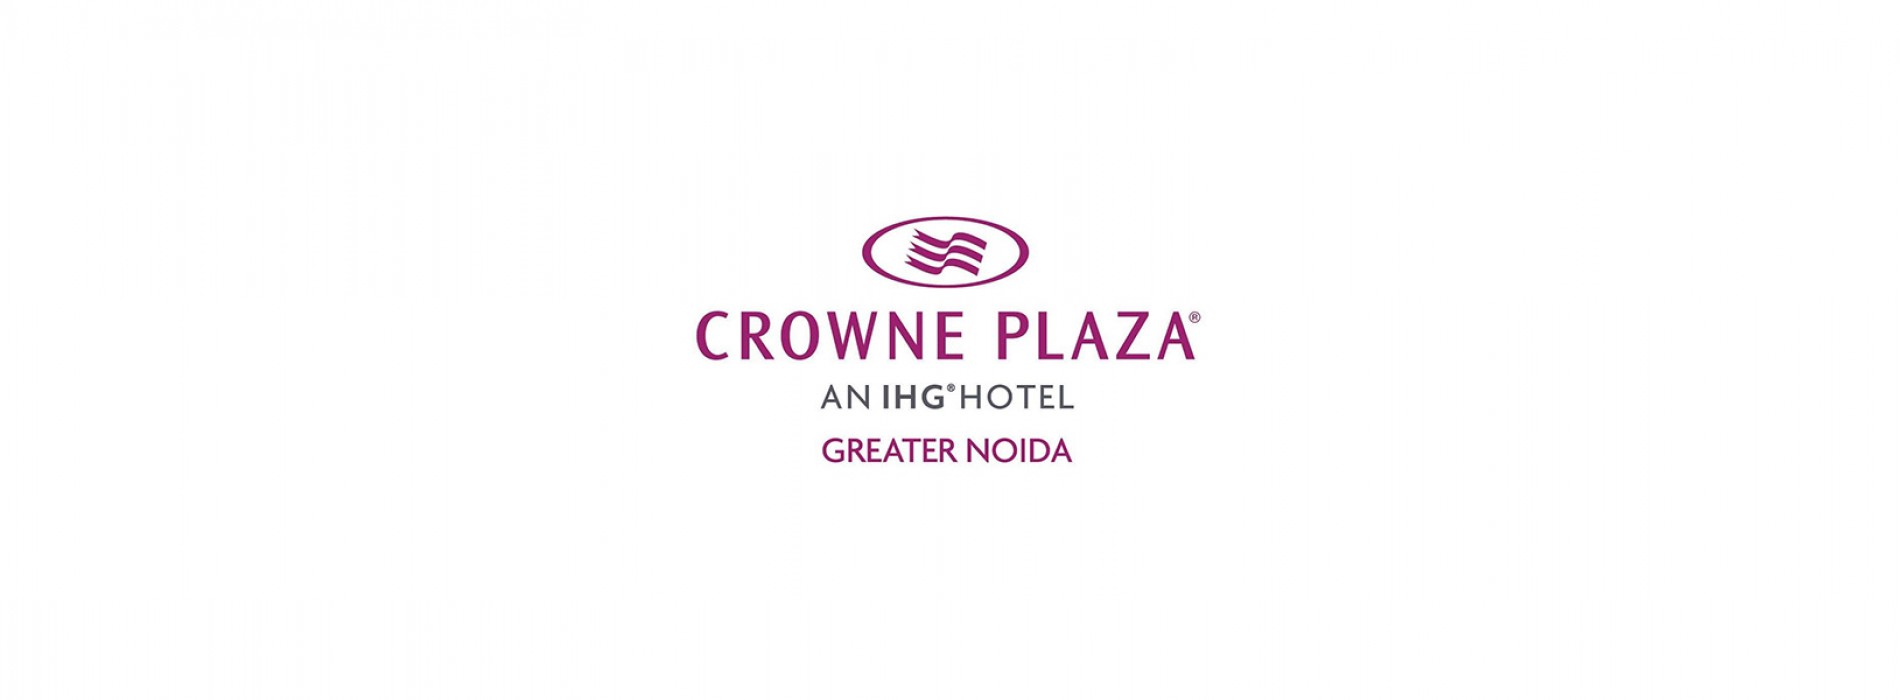 Crowne Plaza Greater Noida Appoints Sharad K Upadhyay As General Manager